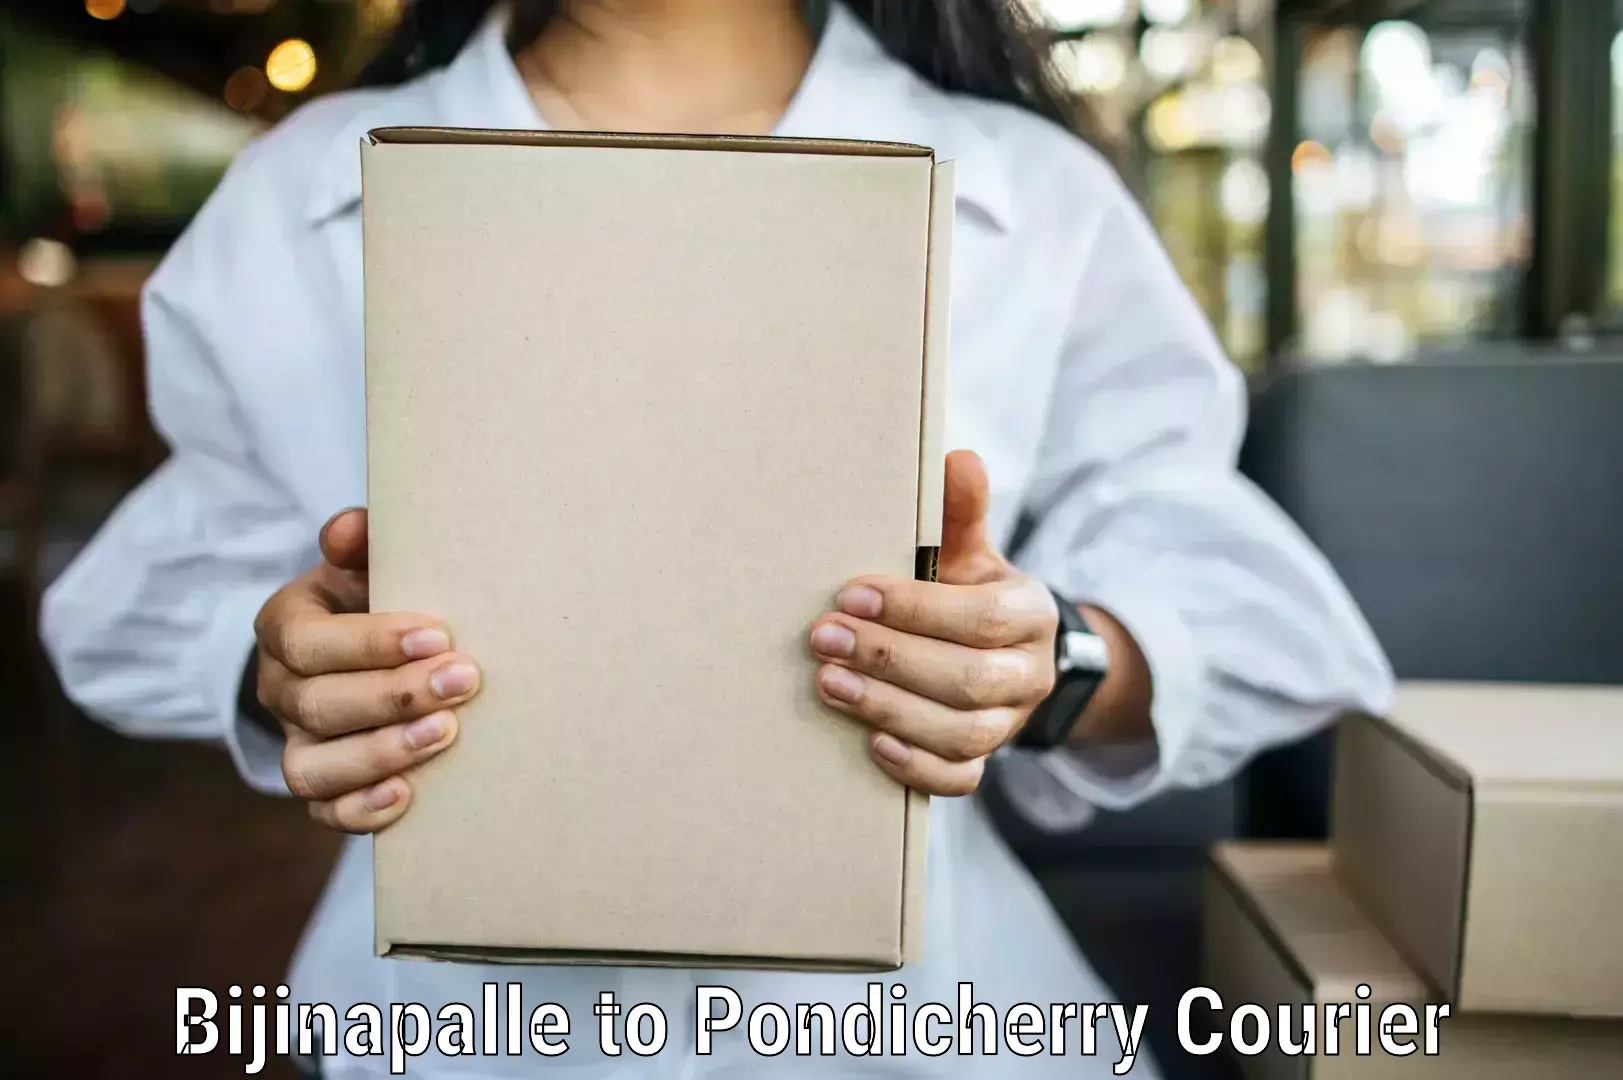 Parcel service for businesses Bijinapalle to Pondicherry